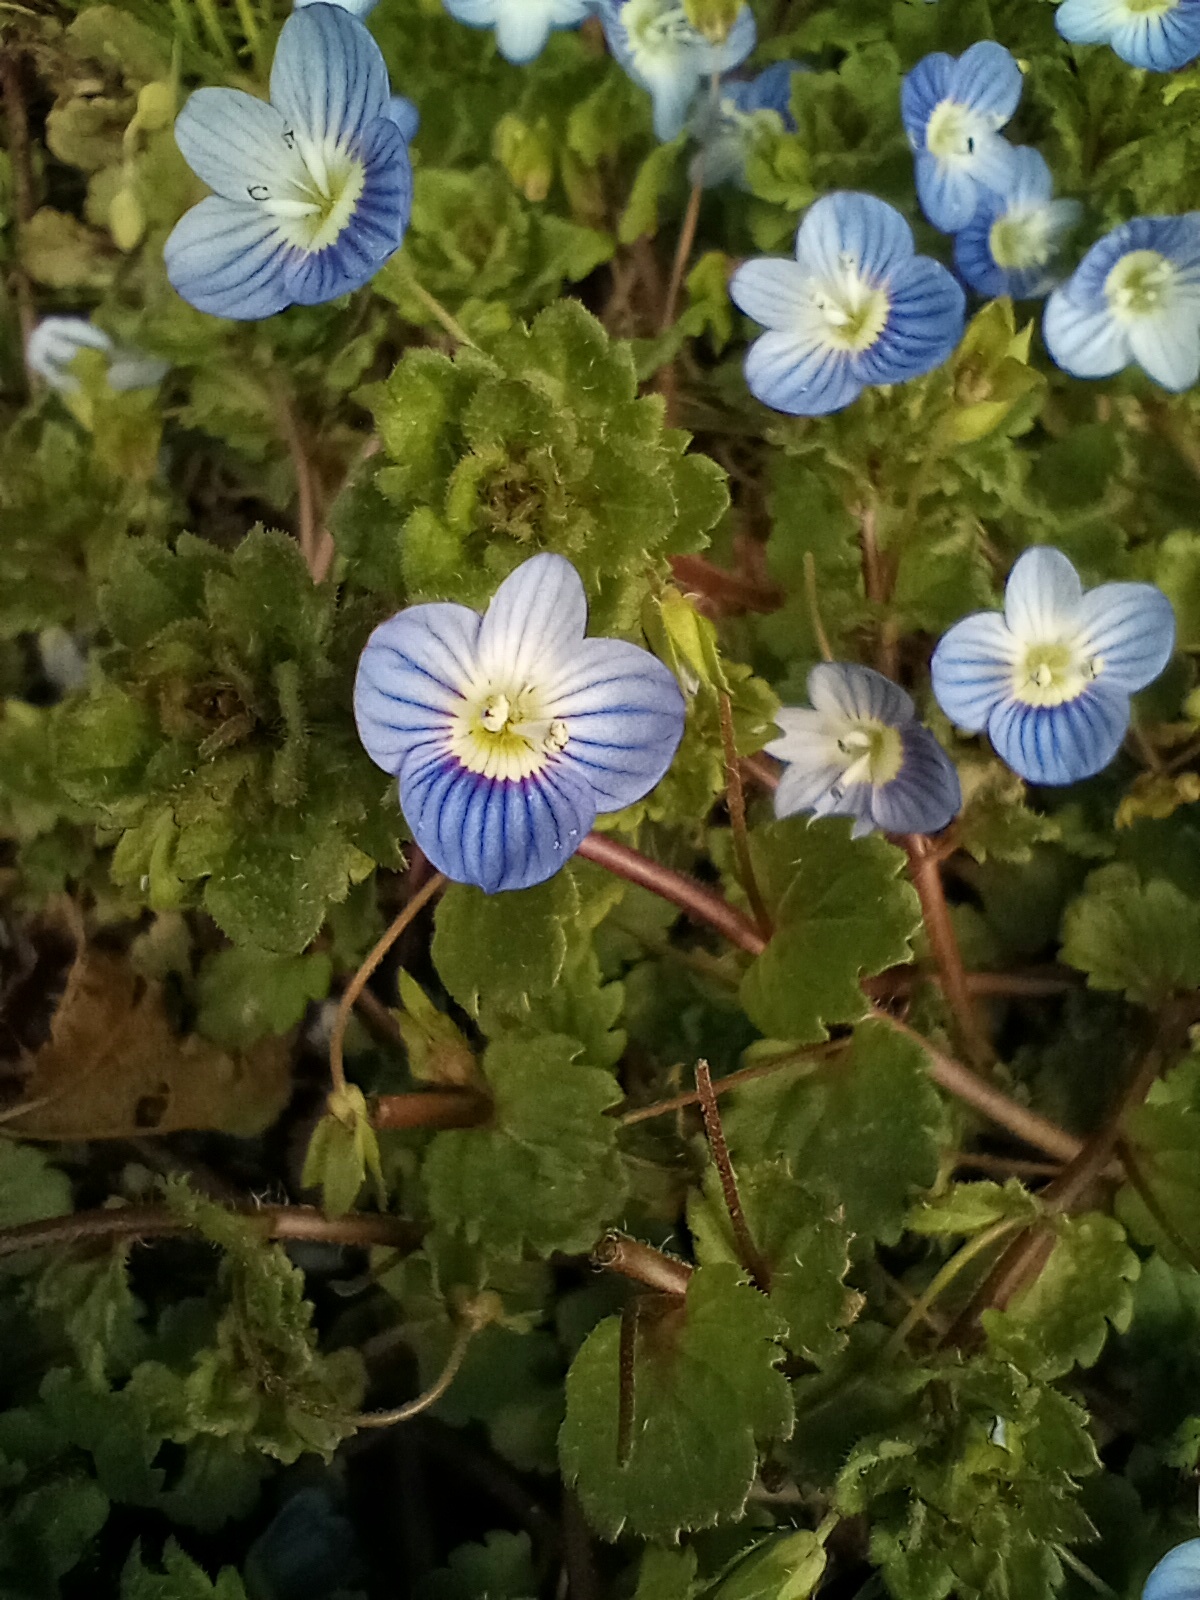 photo of tiny blue flowers up close, showing four blue petals with darker blue stripes.